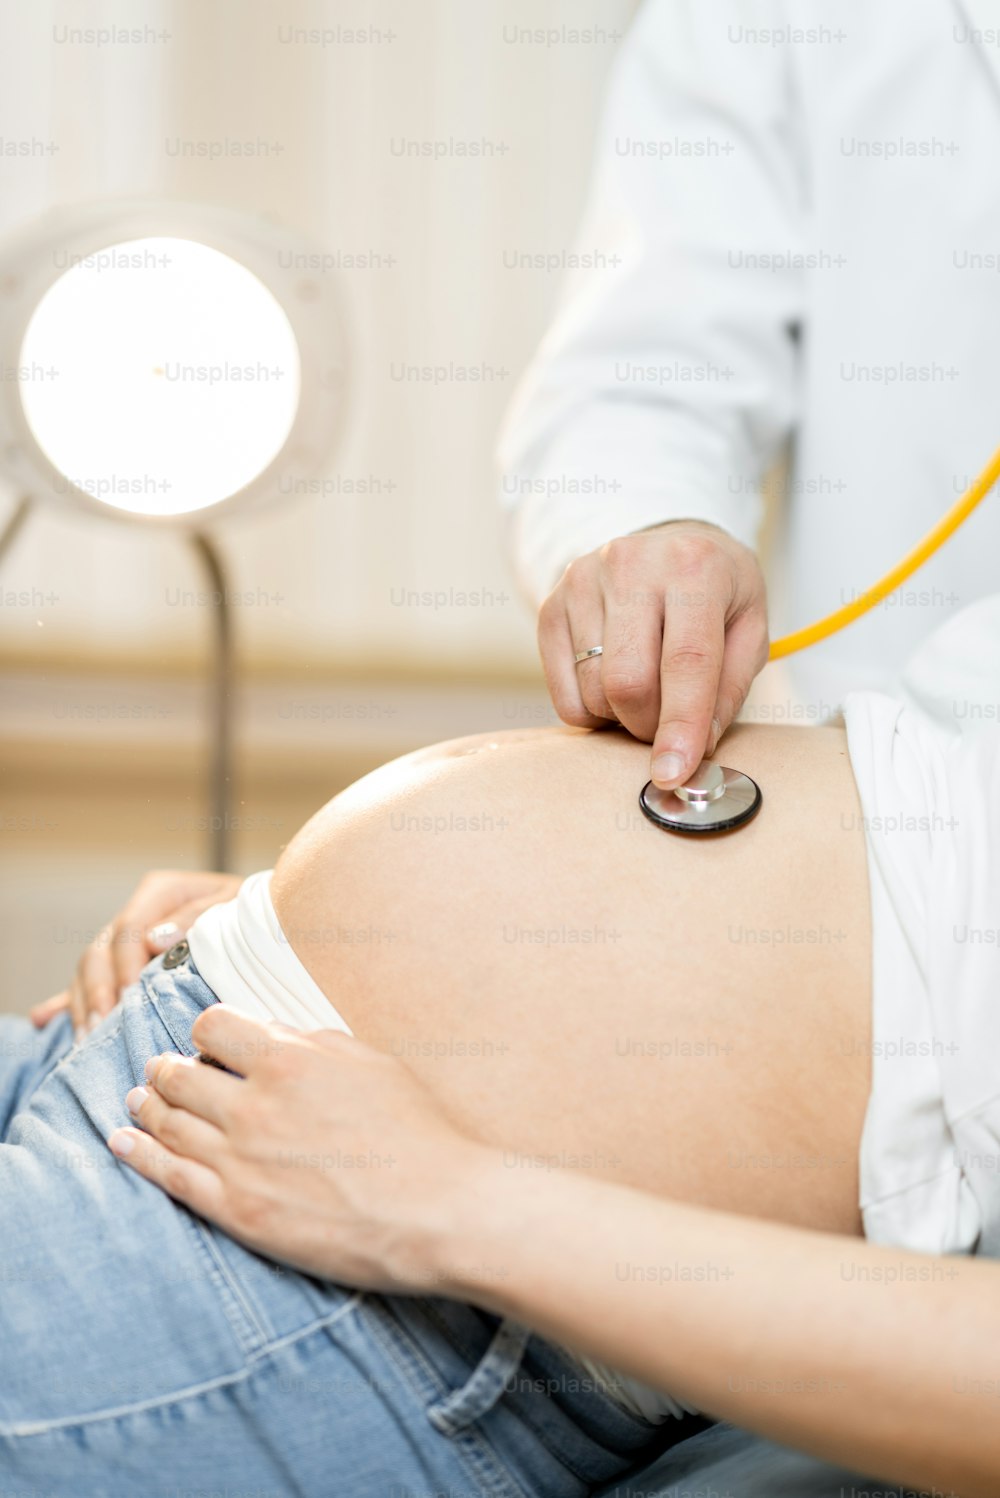 Doctor listening to a pregnant woman's belly with a stethoscope during a medical examination, close-up view